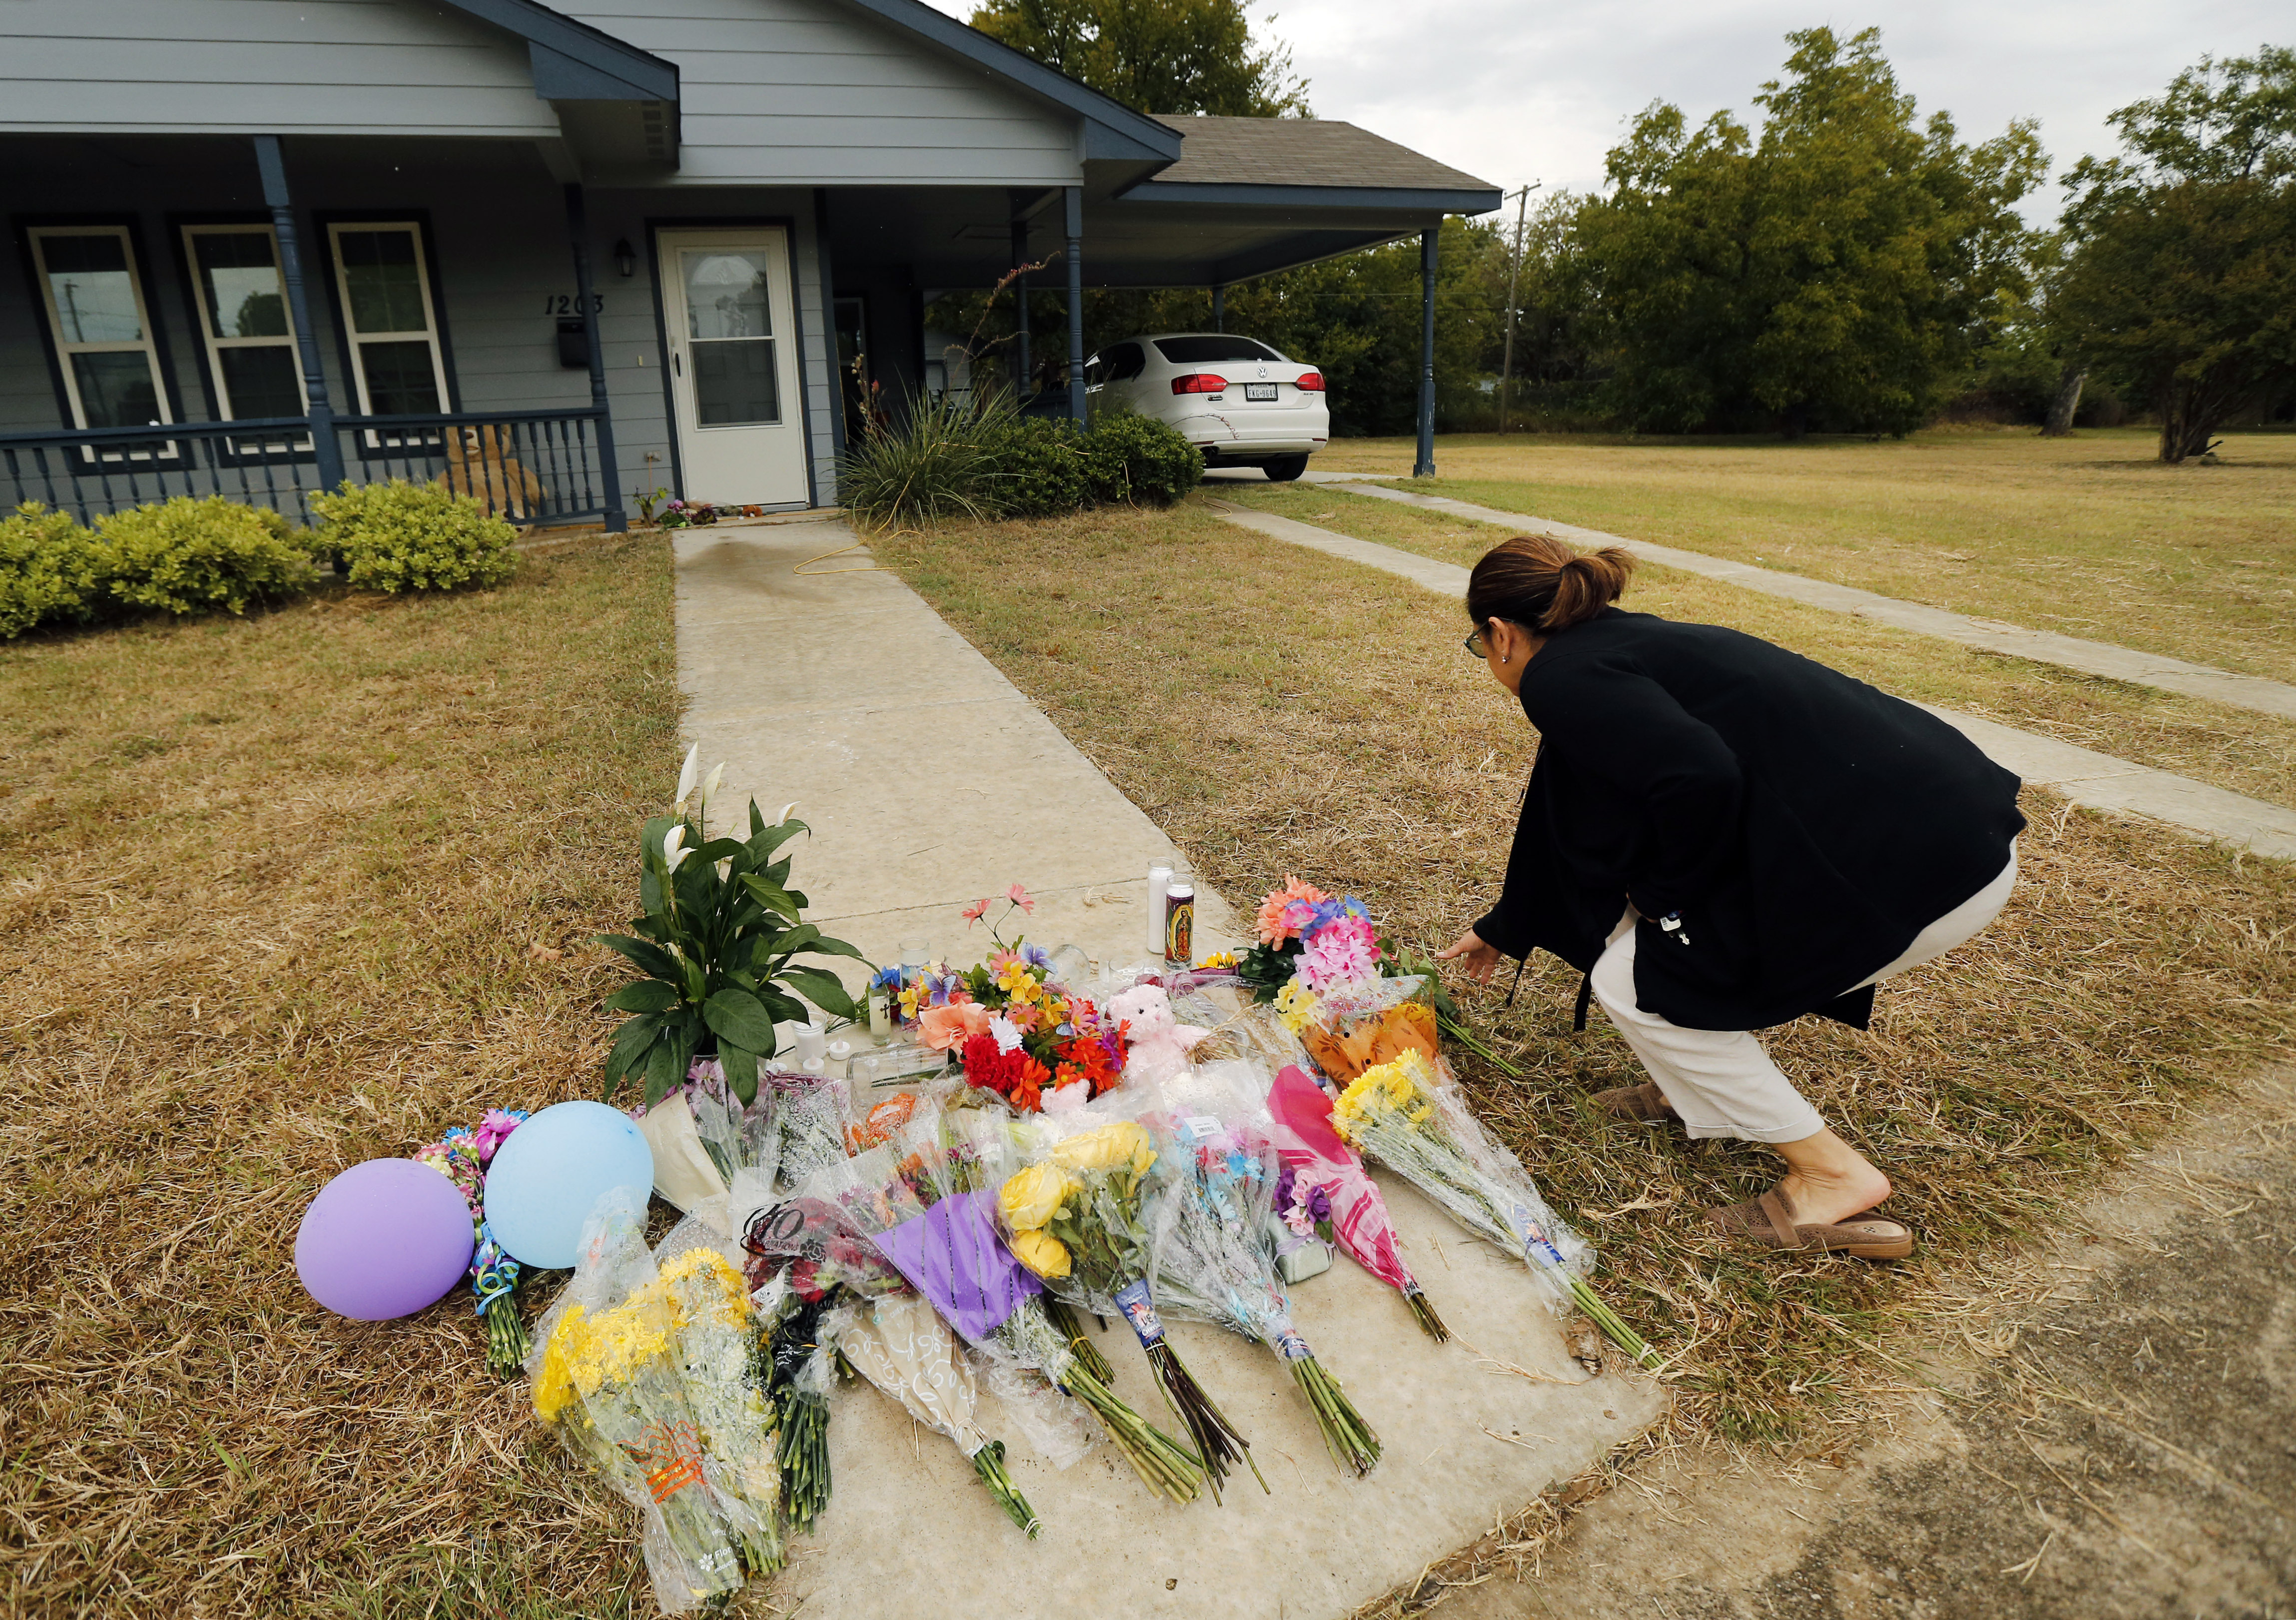 Anastasia Gonzalez, of Burleson, Texas, leaves a flowers on the front sidewalk of Atatiana Jefferson's home on E. Allen Ave in Fort Worth on Oct. 15, 2019. (Tom Fox—The Dallas Morning News/AP)